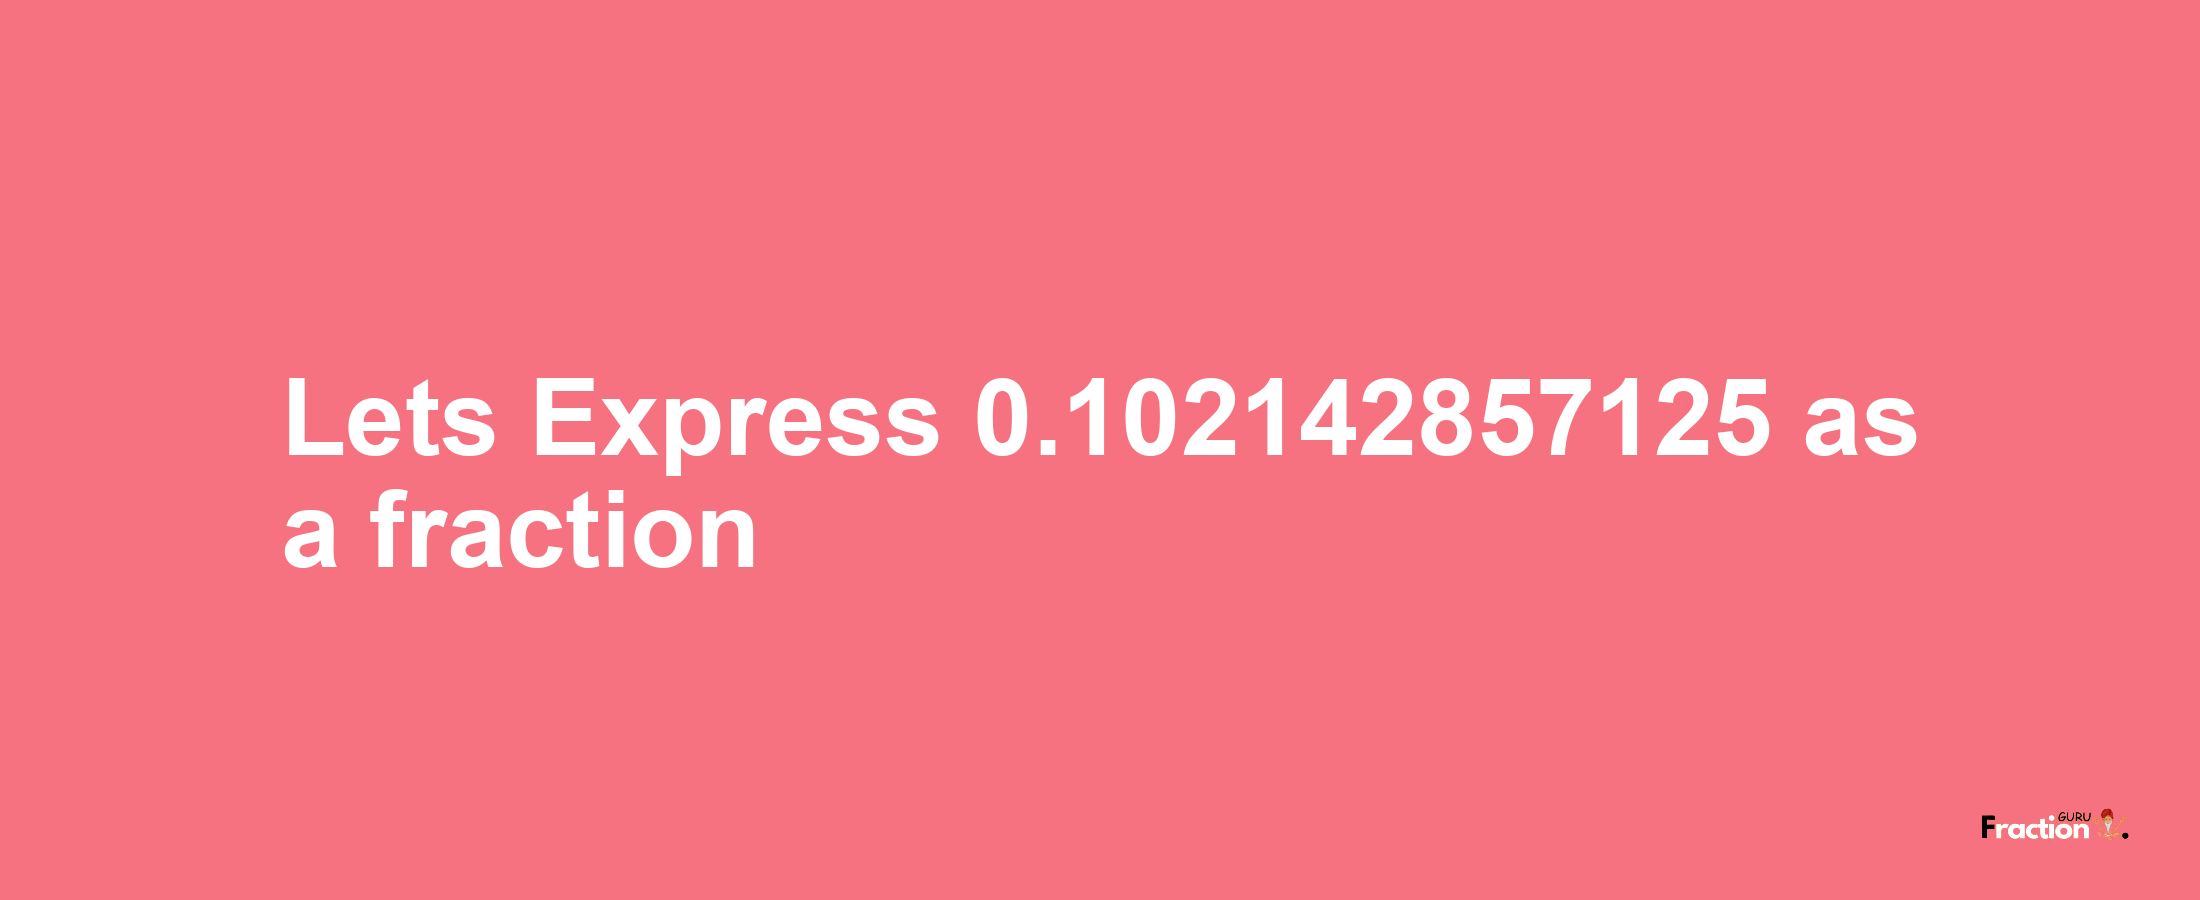 Lets Express 0.102142857125 as afraction